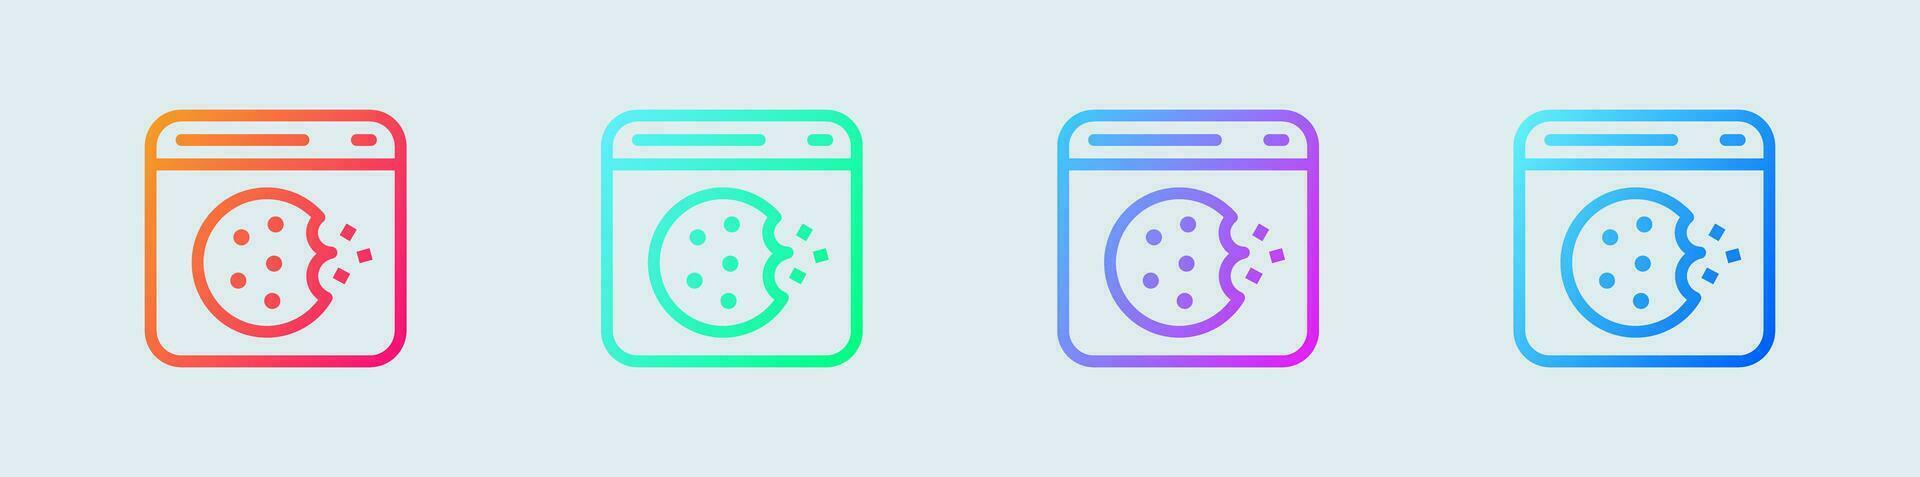 Cookie line icon in gradient colors. Web data signs vector illustration.